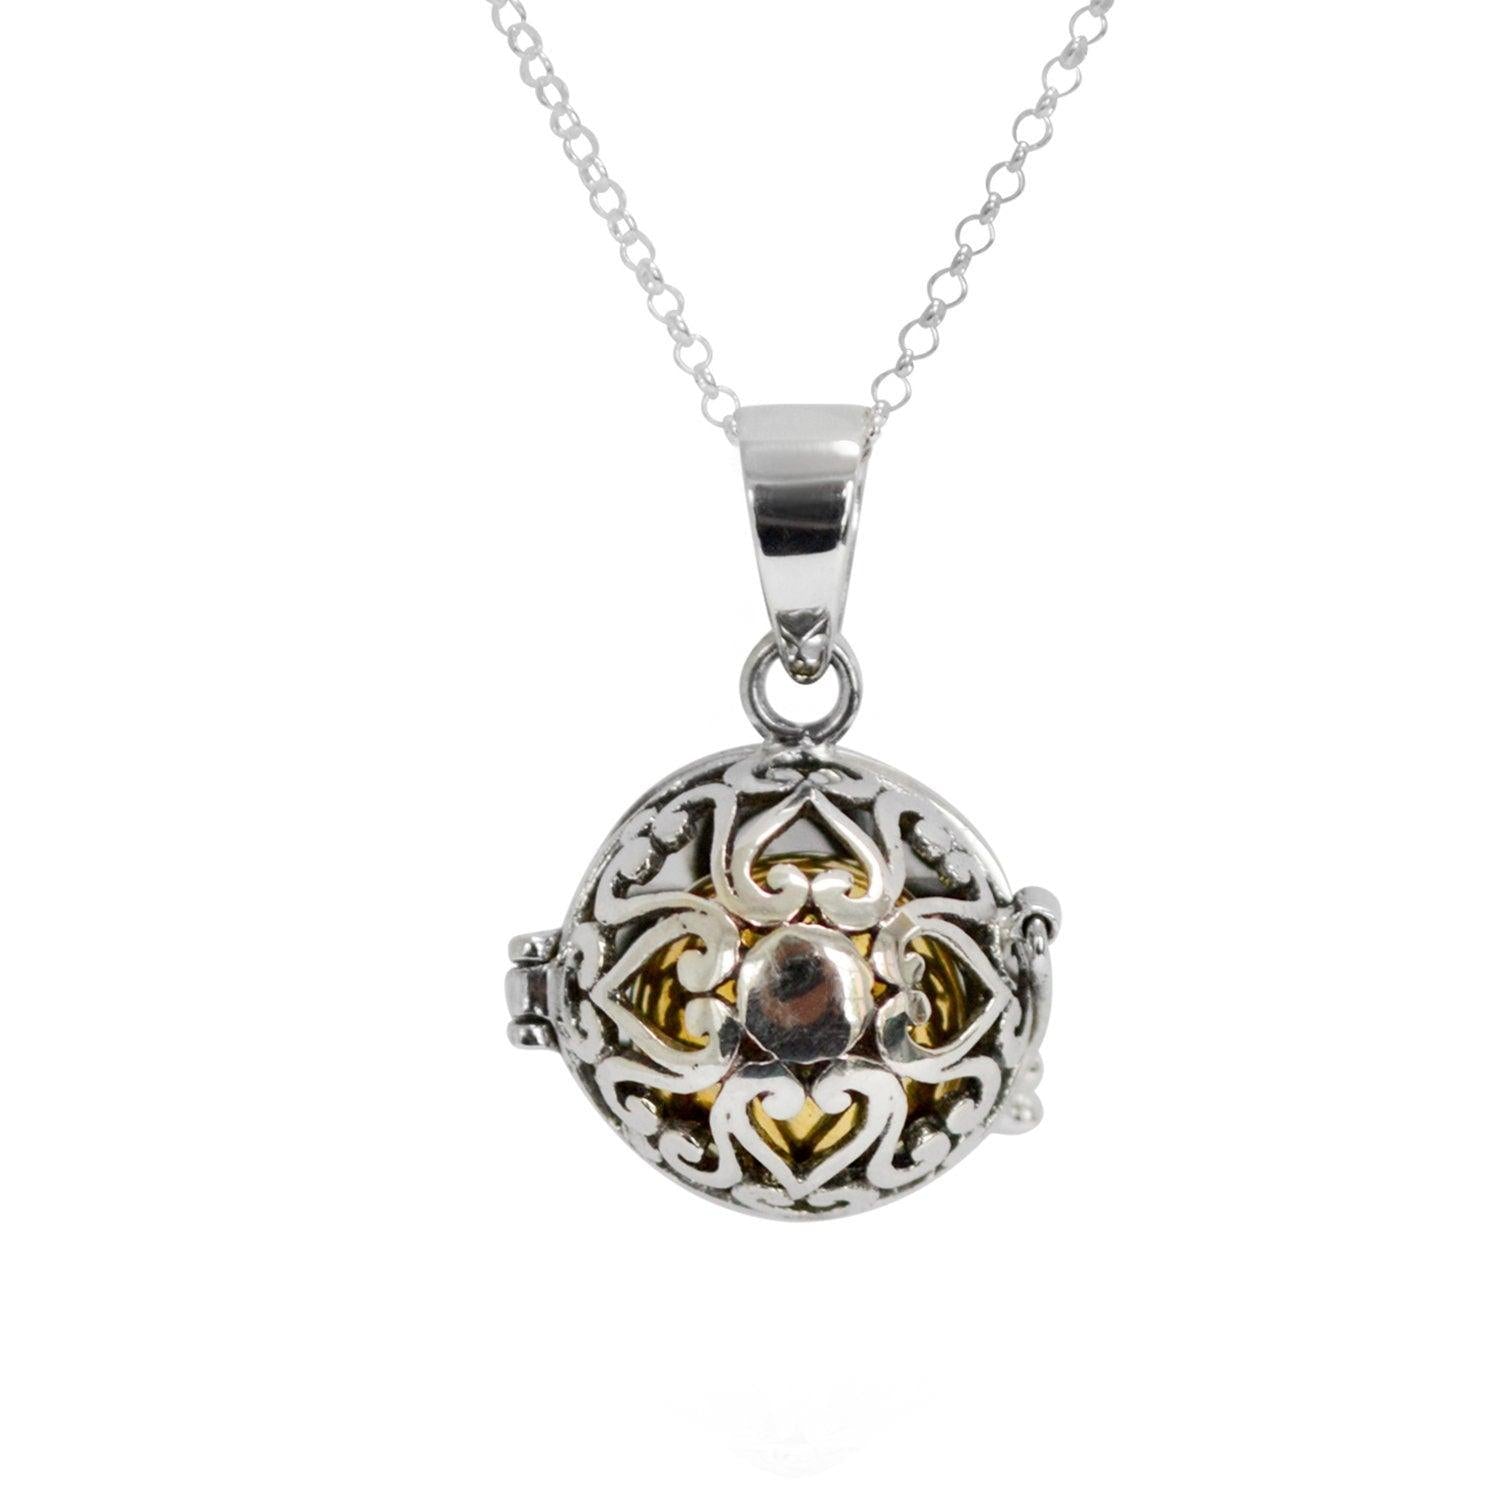 Bola Necklace Pendant in 925 Sterling Silver with Chain, Handmade Harmony Ball, Angel Caller - 2.5 Cm - Inspiring Jewellery